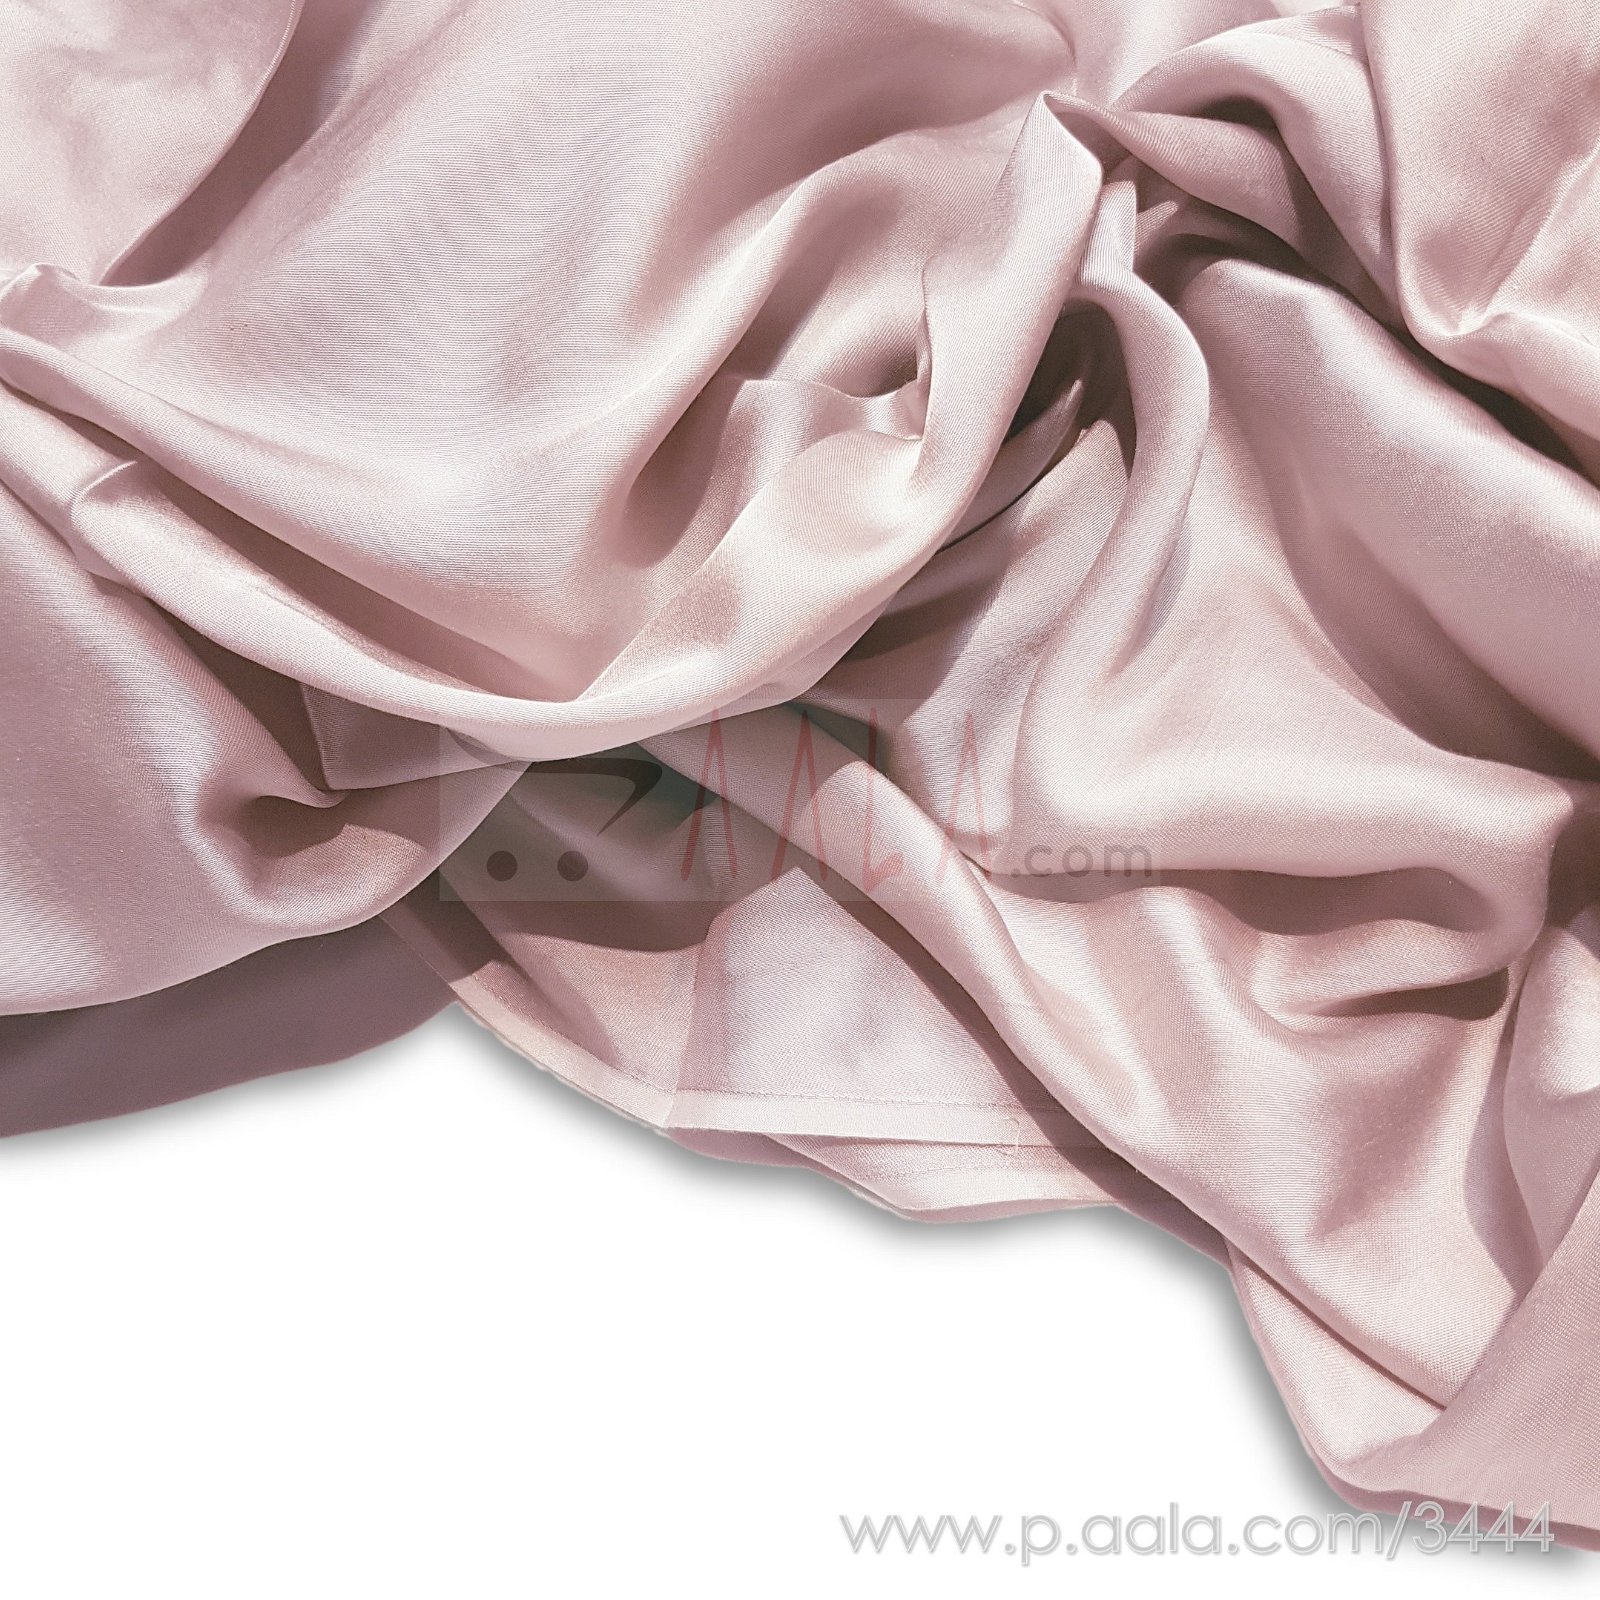 Modal Satin Viscose 44 Inches Dyed Per Metre #3444